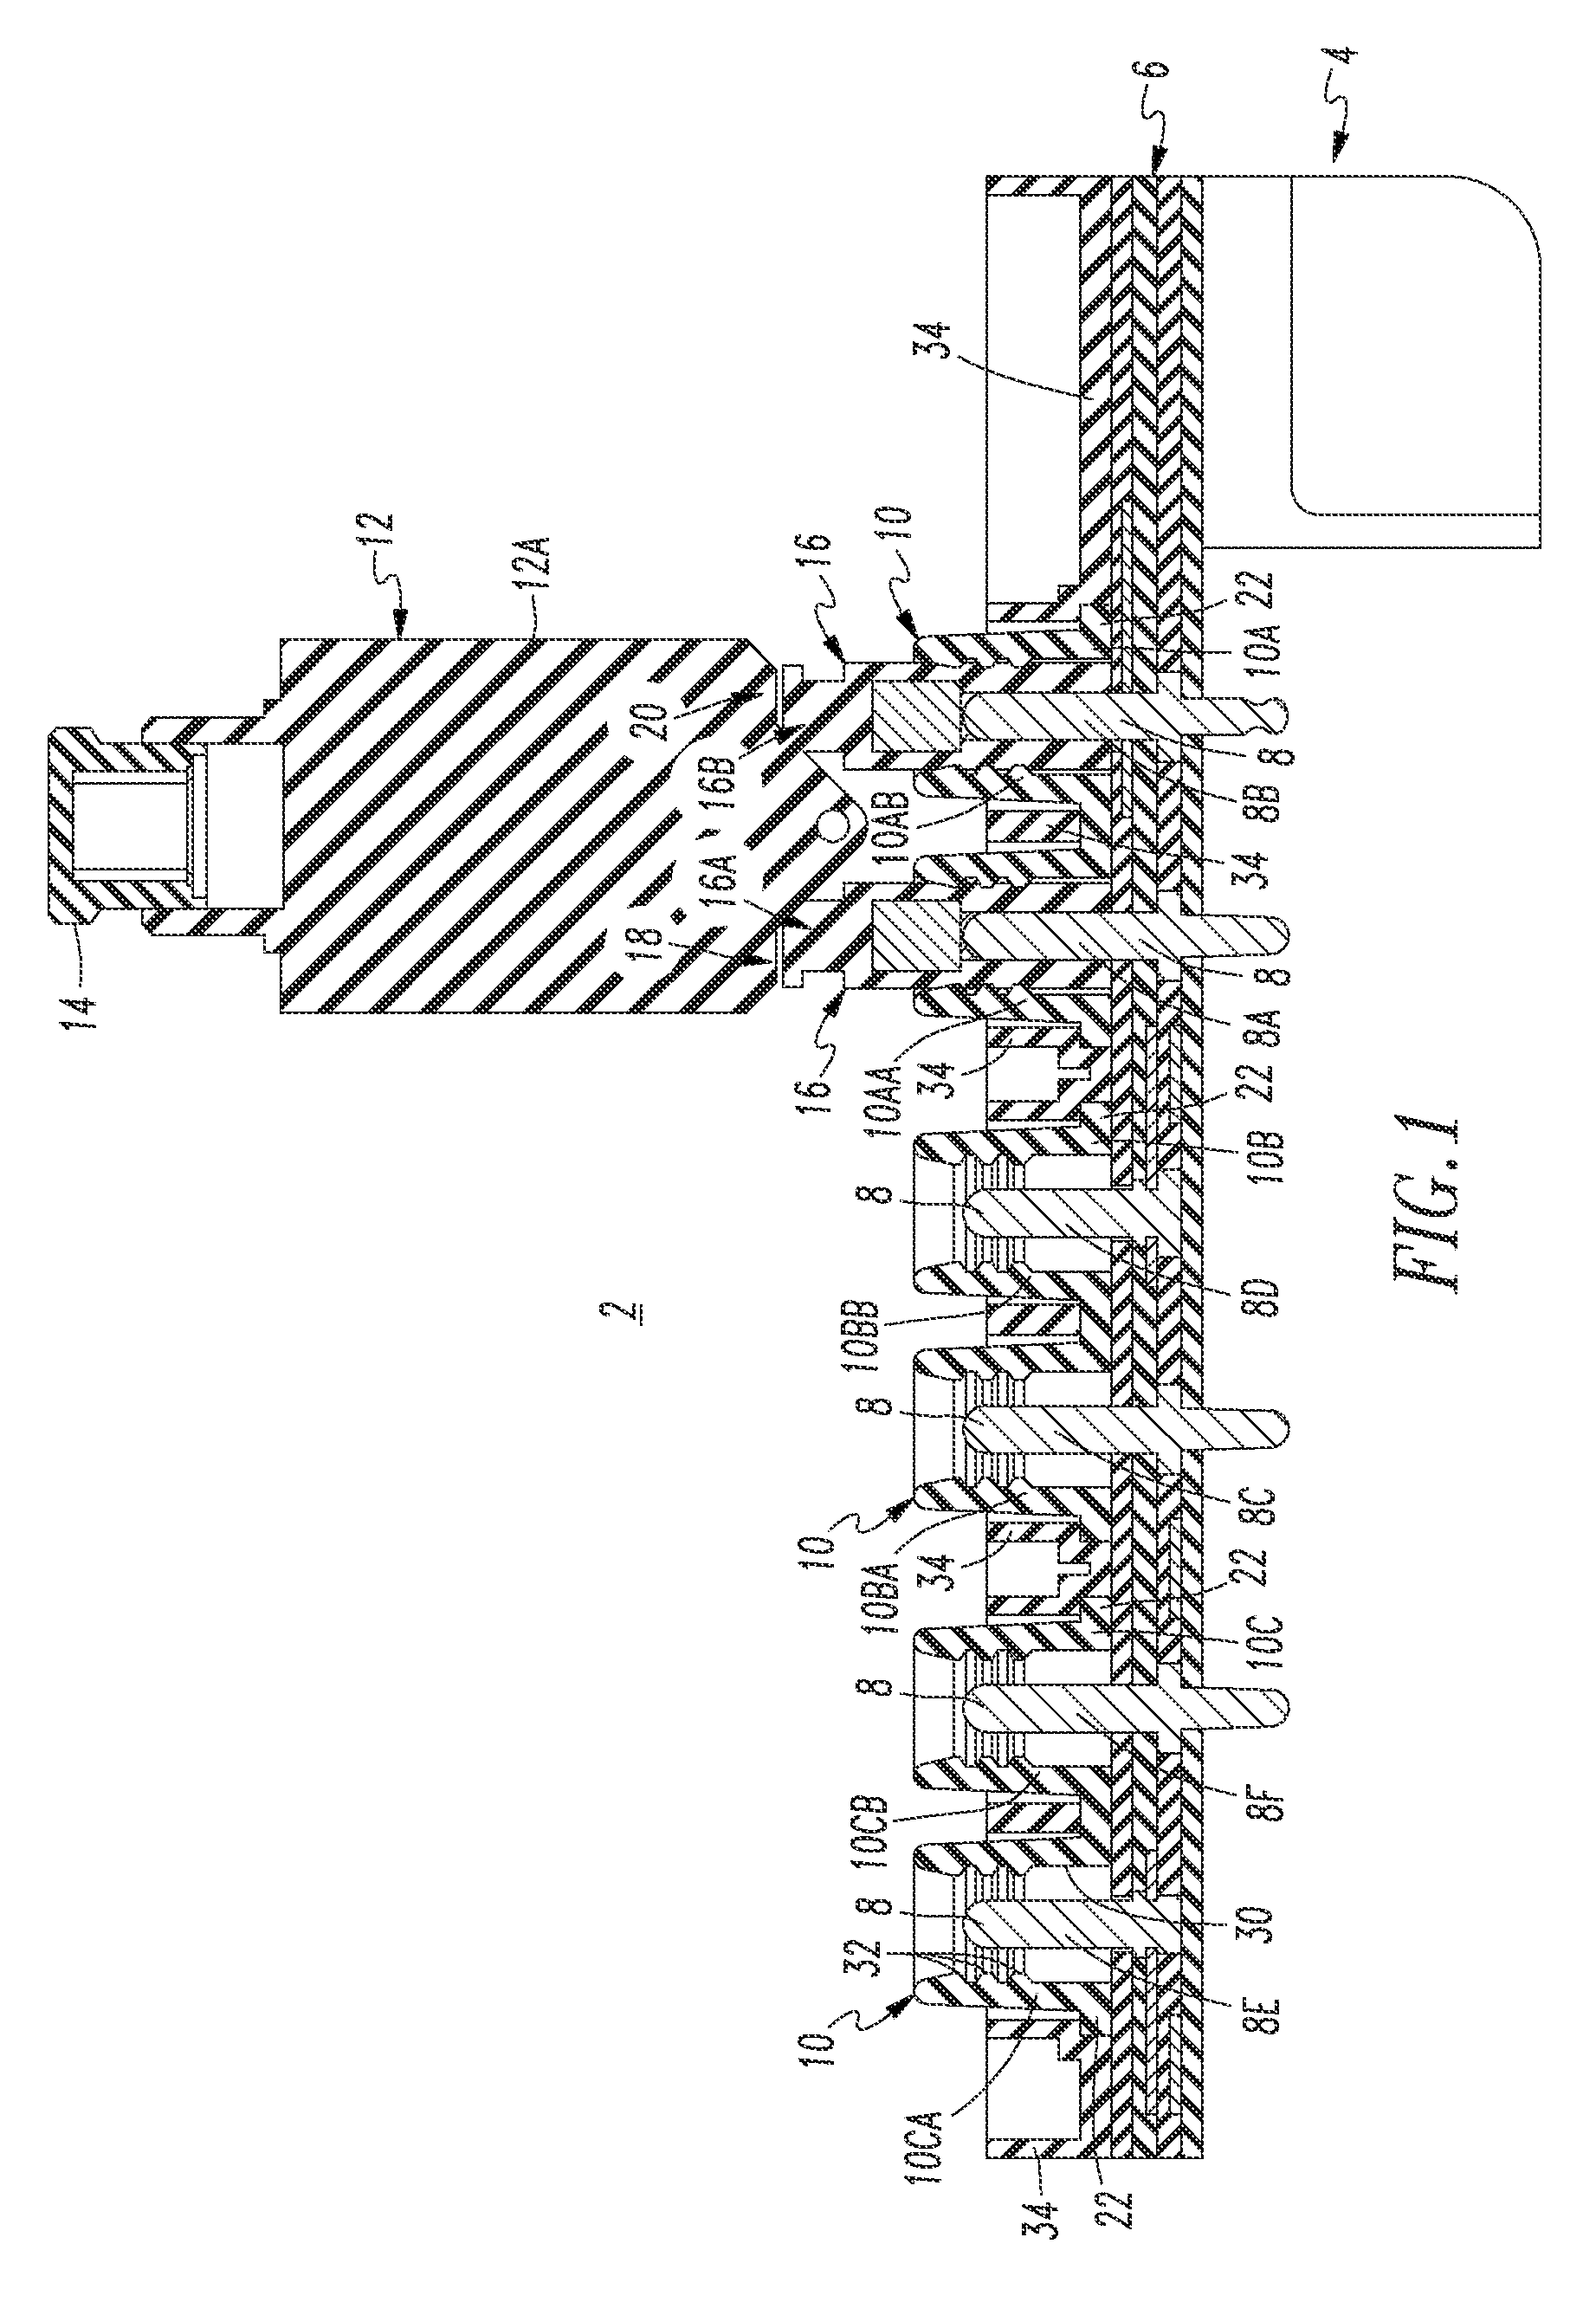 Plug-in circuit breaker assembly including insulative retainers